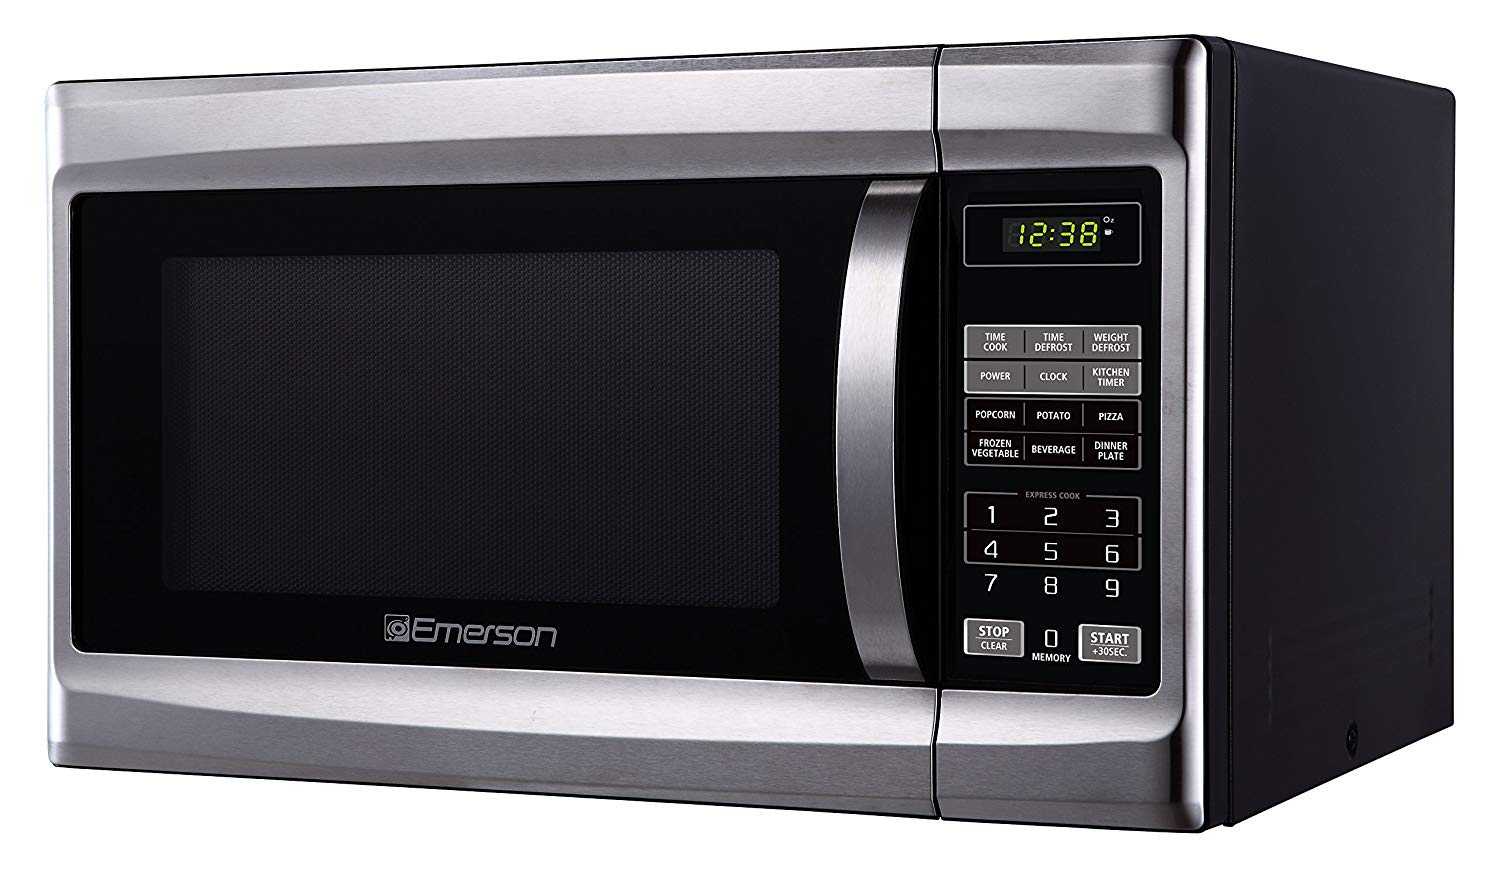 Emerson 1.3 CU. FT. 1000 Watt, Touch Control, Stainless Steel Front